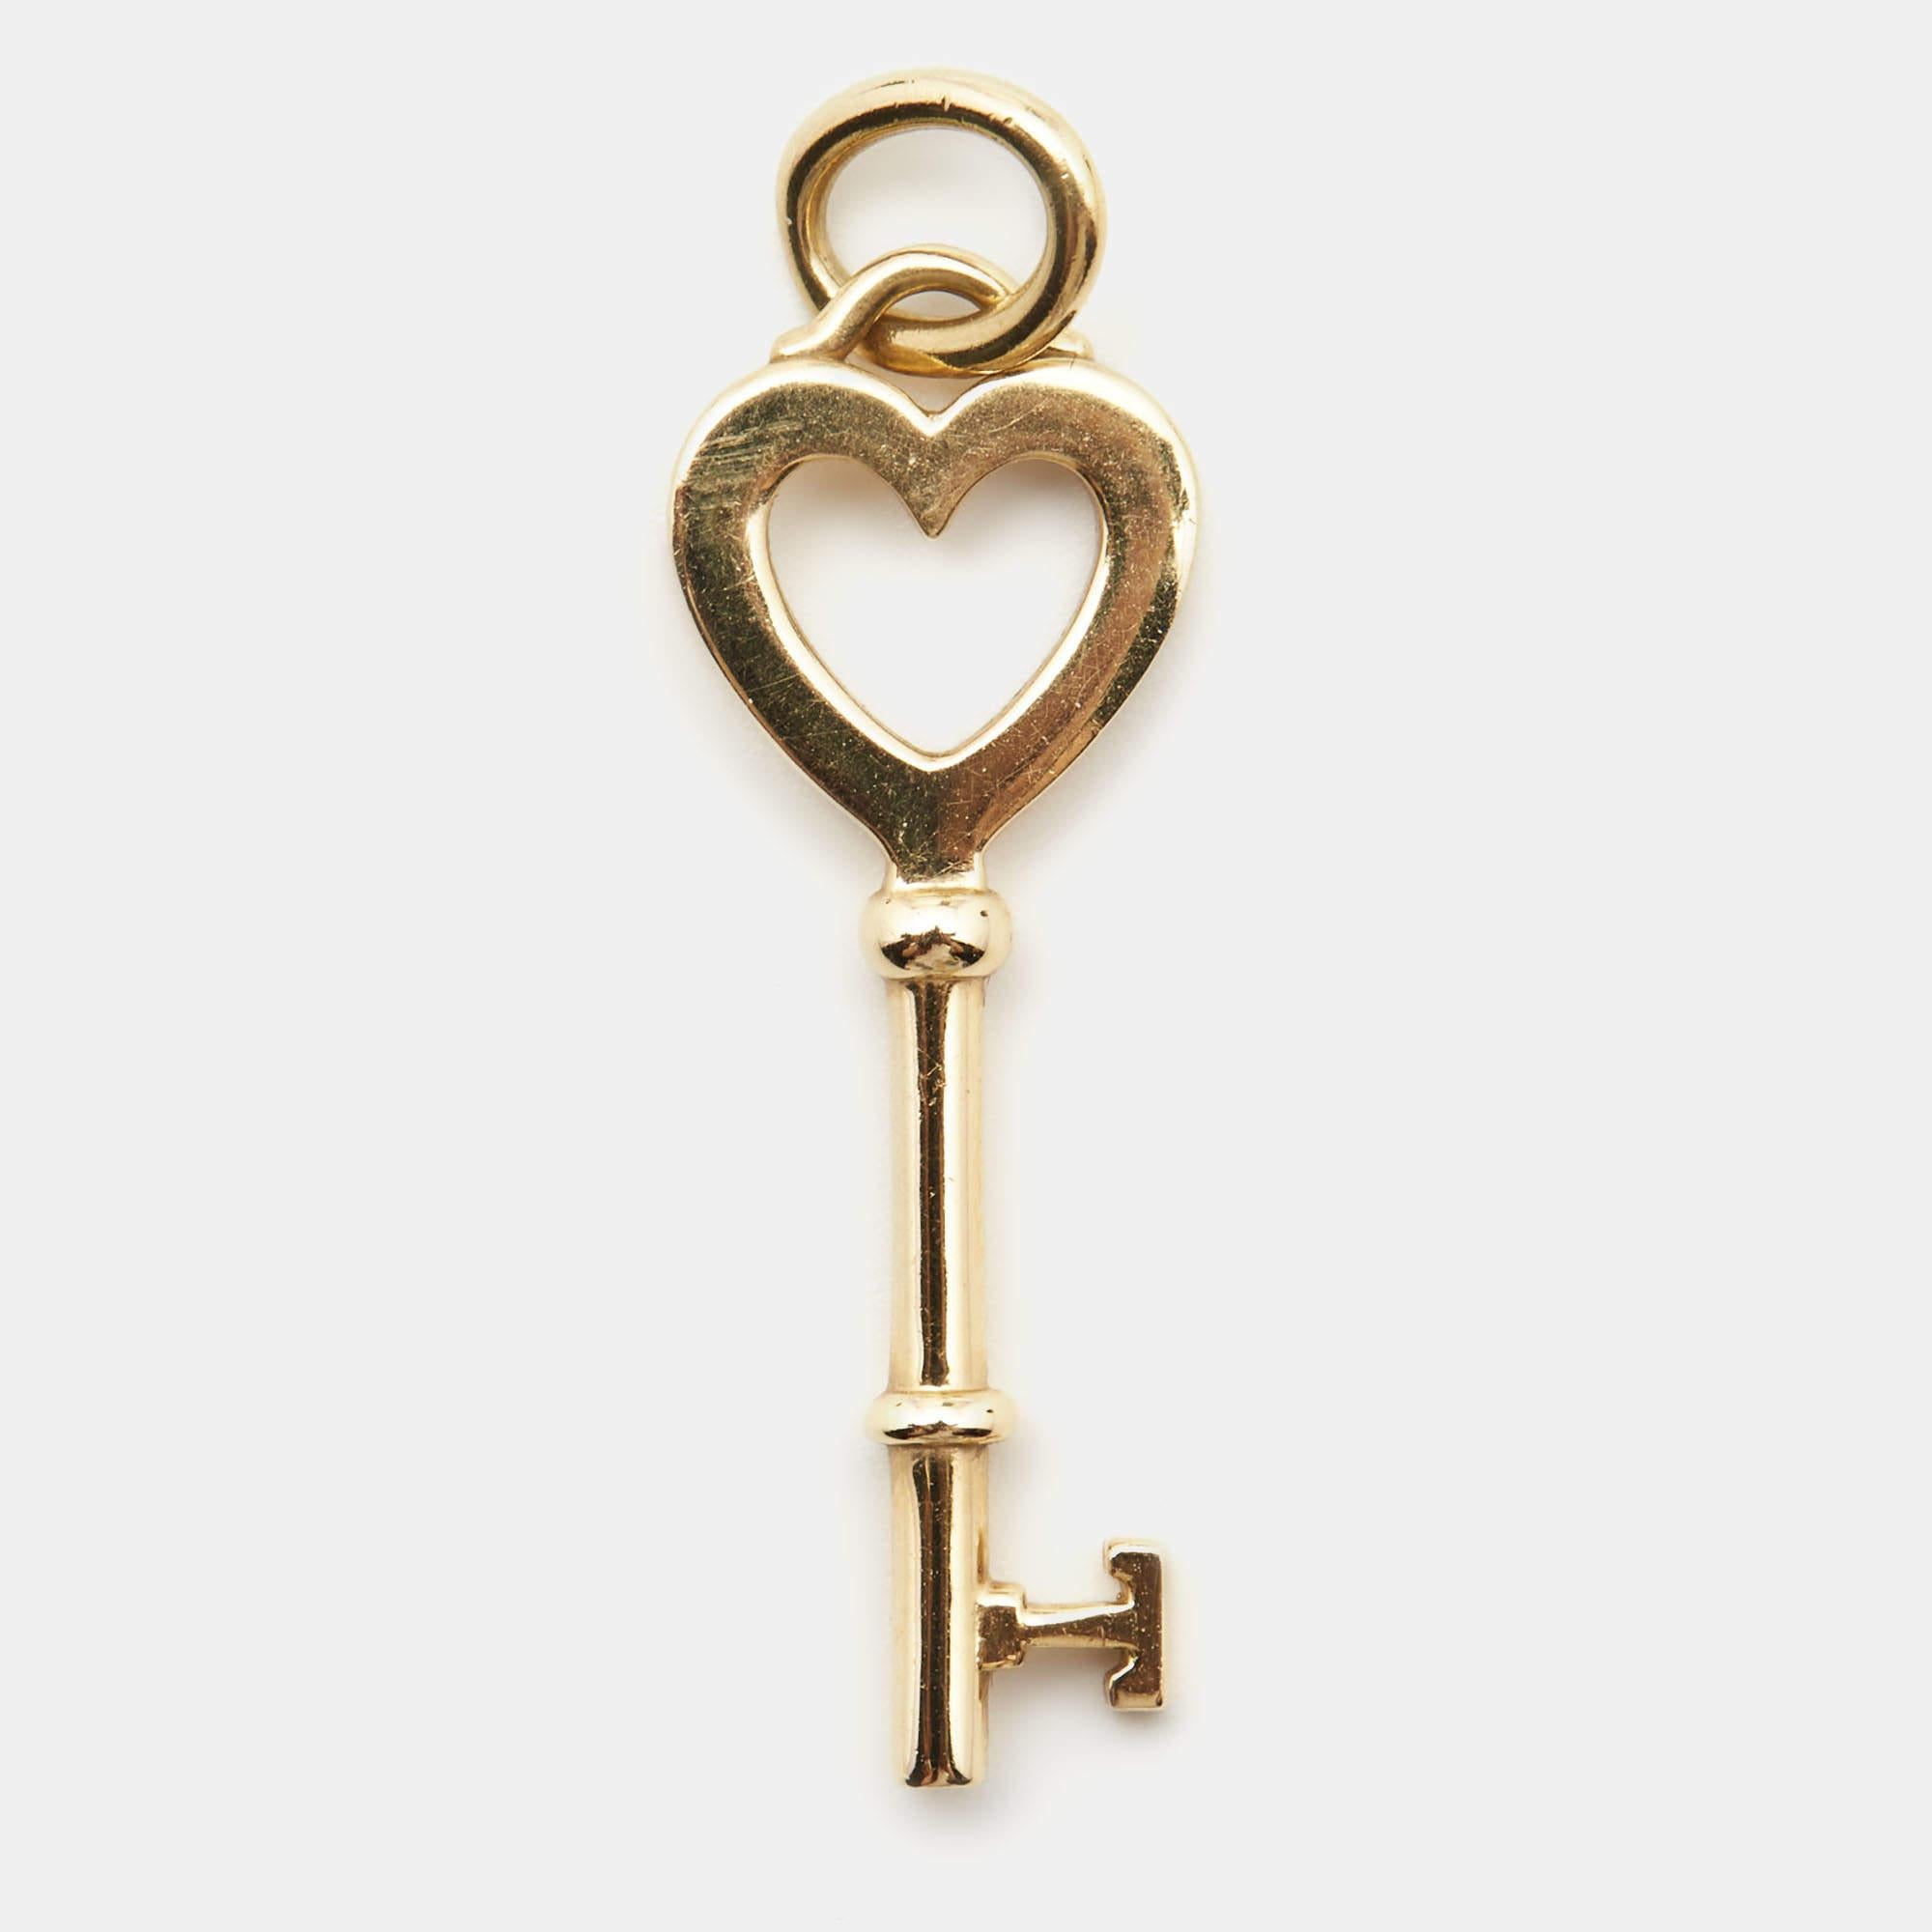 This Tiffany & Co. beauty comes made from 18k yellow gold into a pendant. The creation has a heart-shaped bow and a bail on top that allows you to use it with necklace or bracelet chains. The pendant, like all of the other keys from Tiffany,